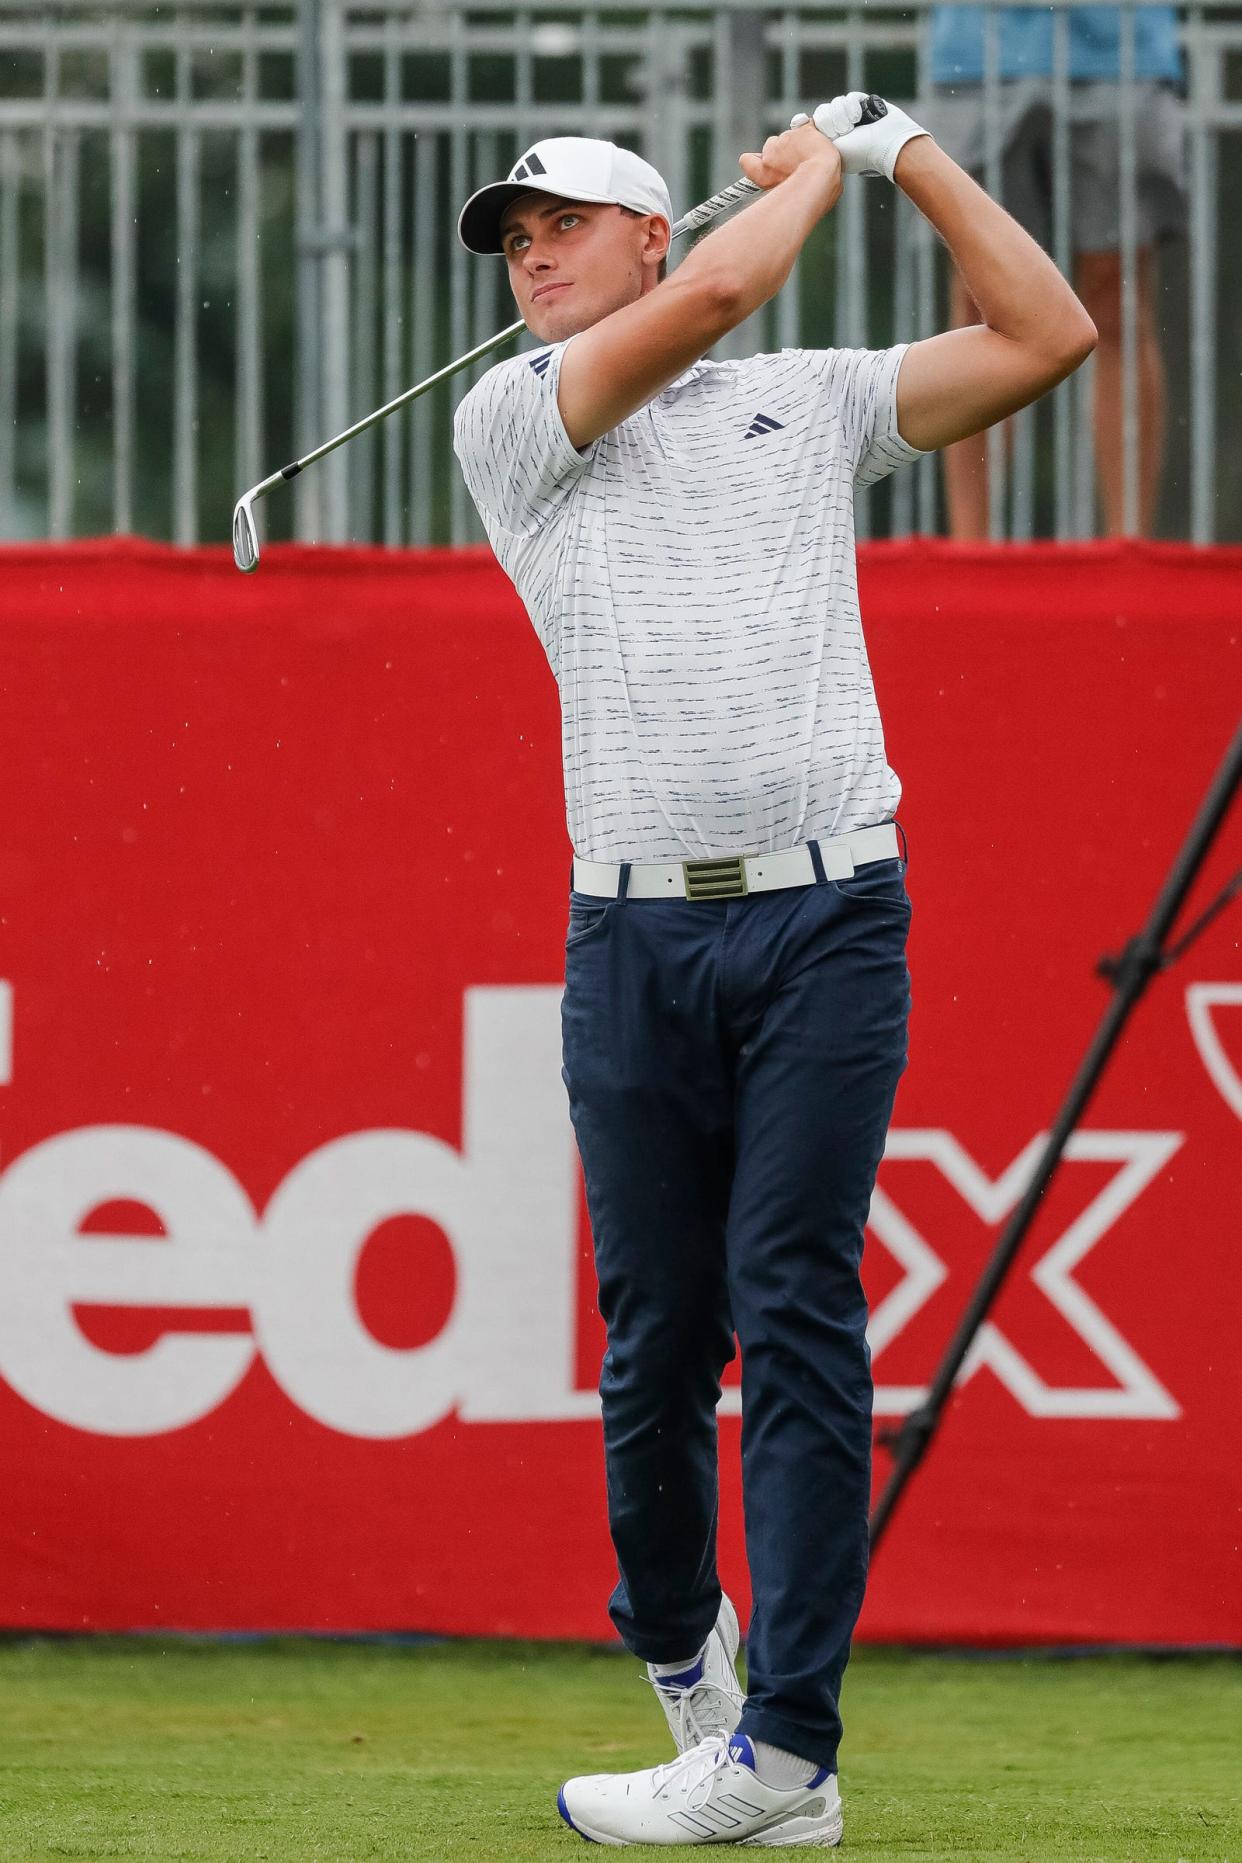 Ludvig Aberg, pictured here at the Rocket Mortage Classic this summer, on Monday was named to Team Europe for the Ryder Cup.